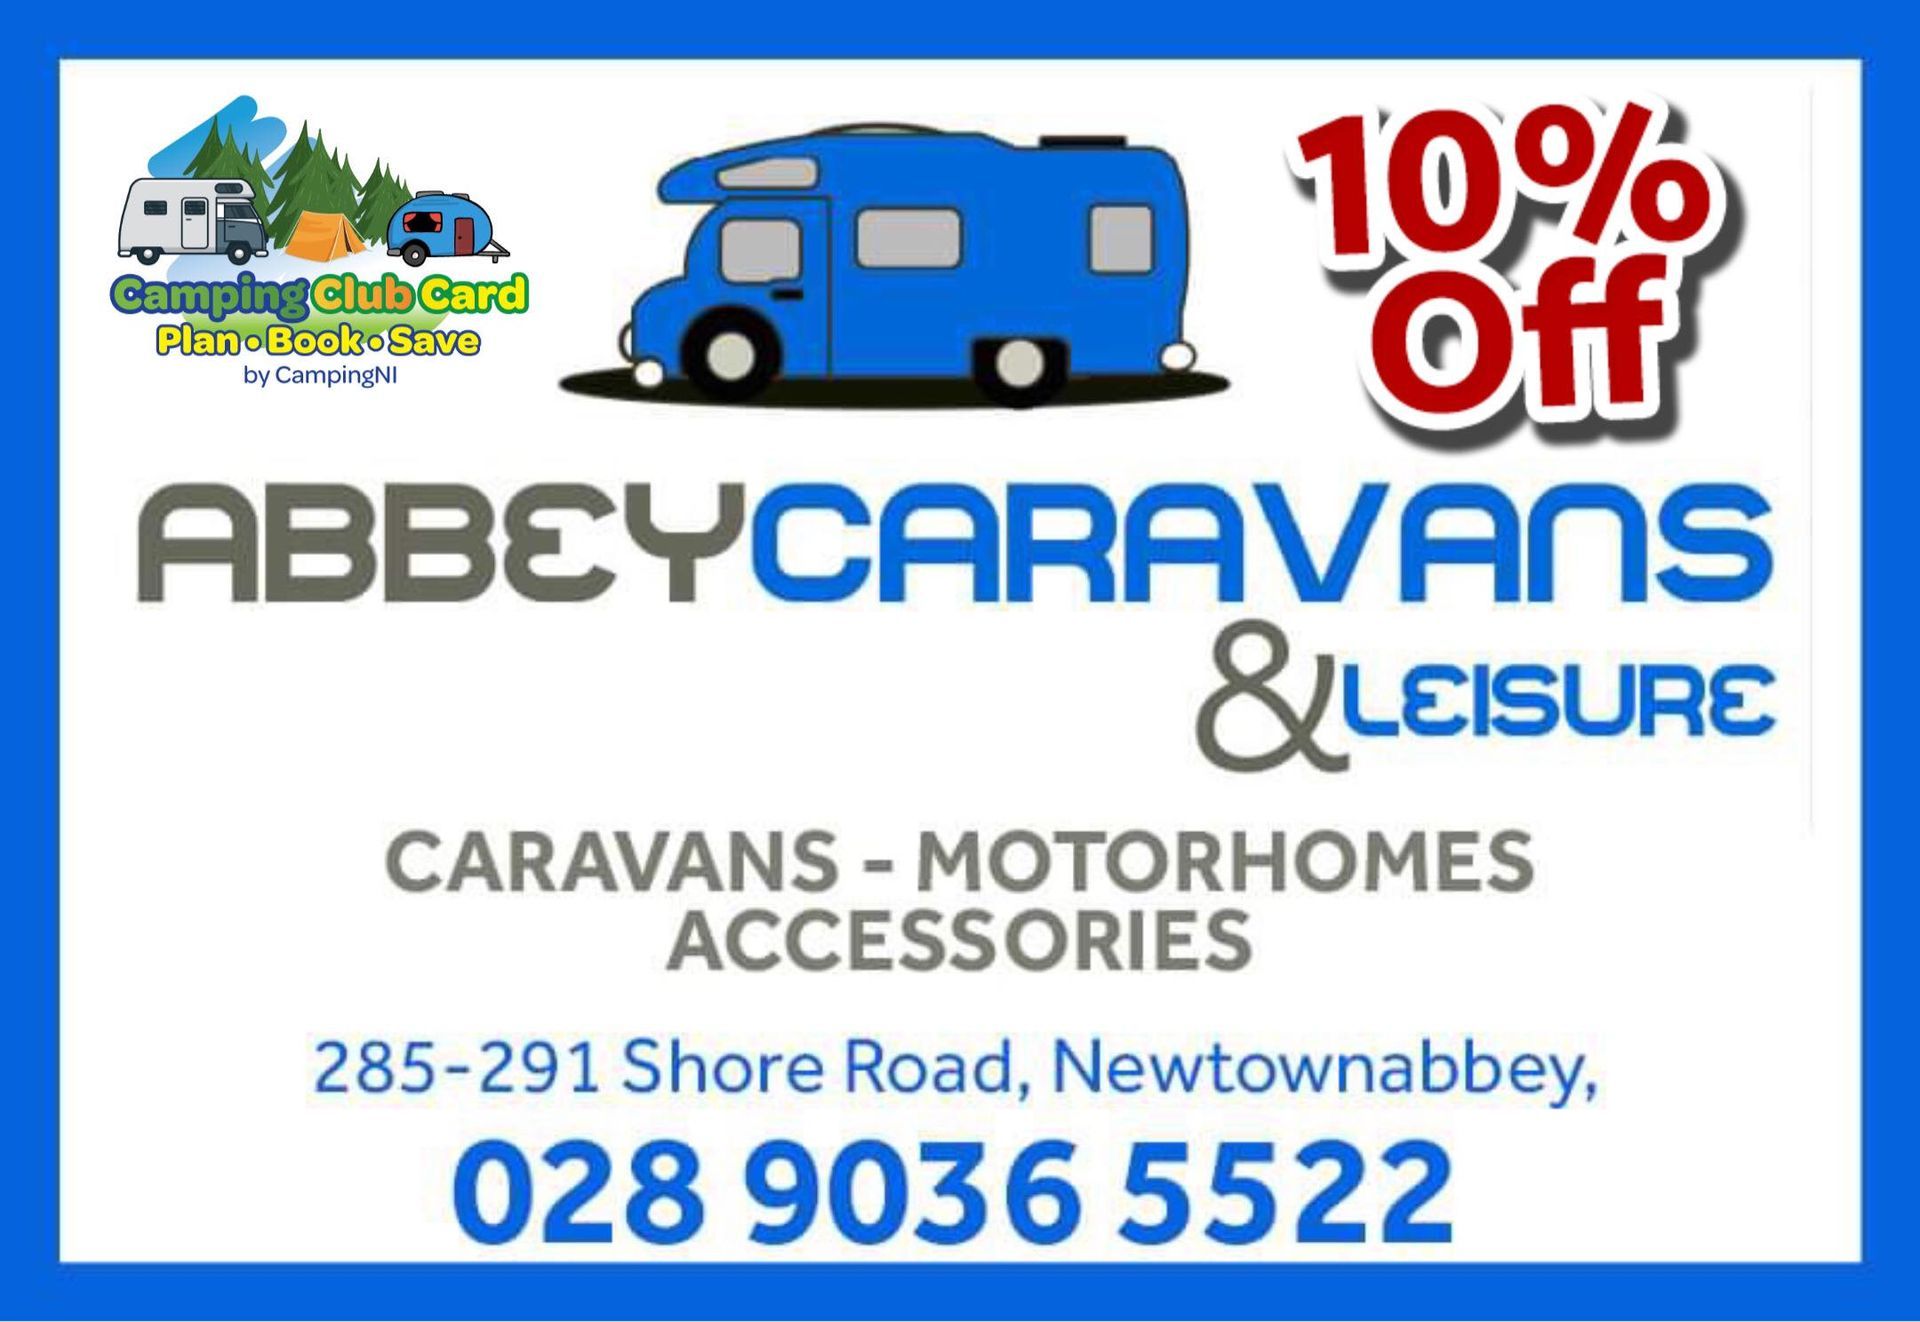 Abbey Caravans & Leisure Camping Club Card by CampingNI members discount